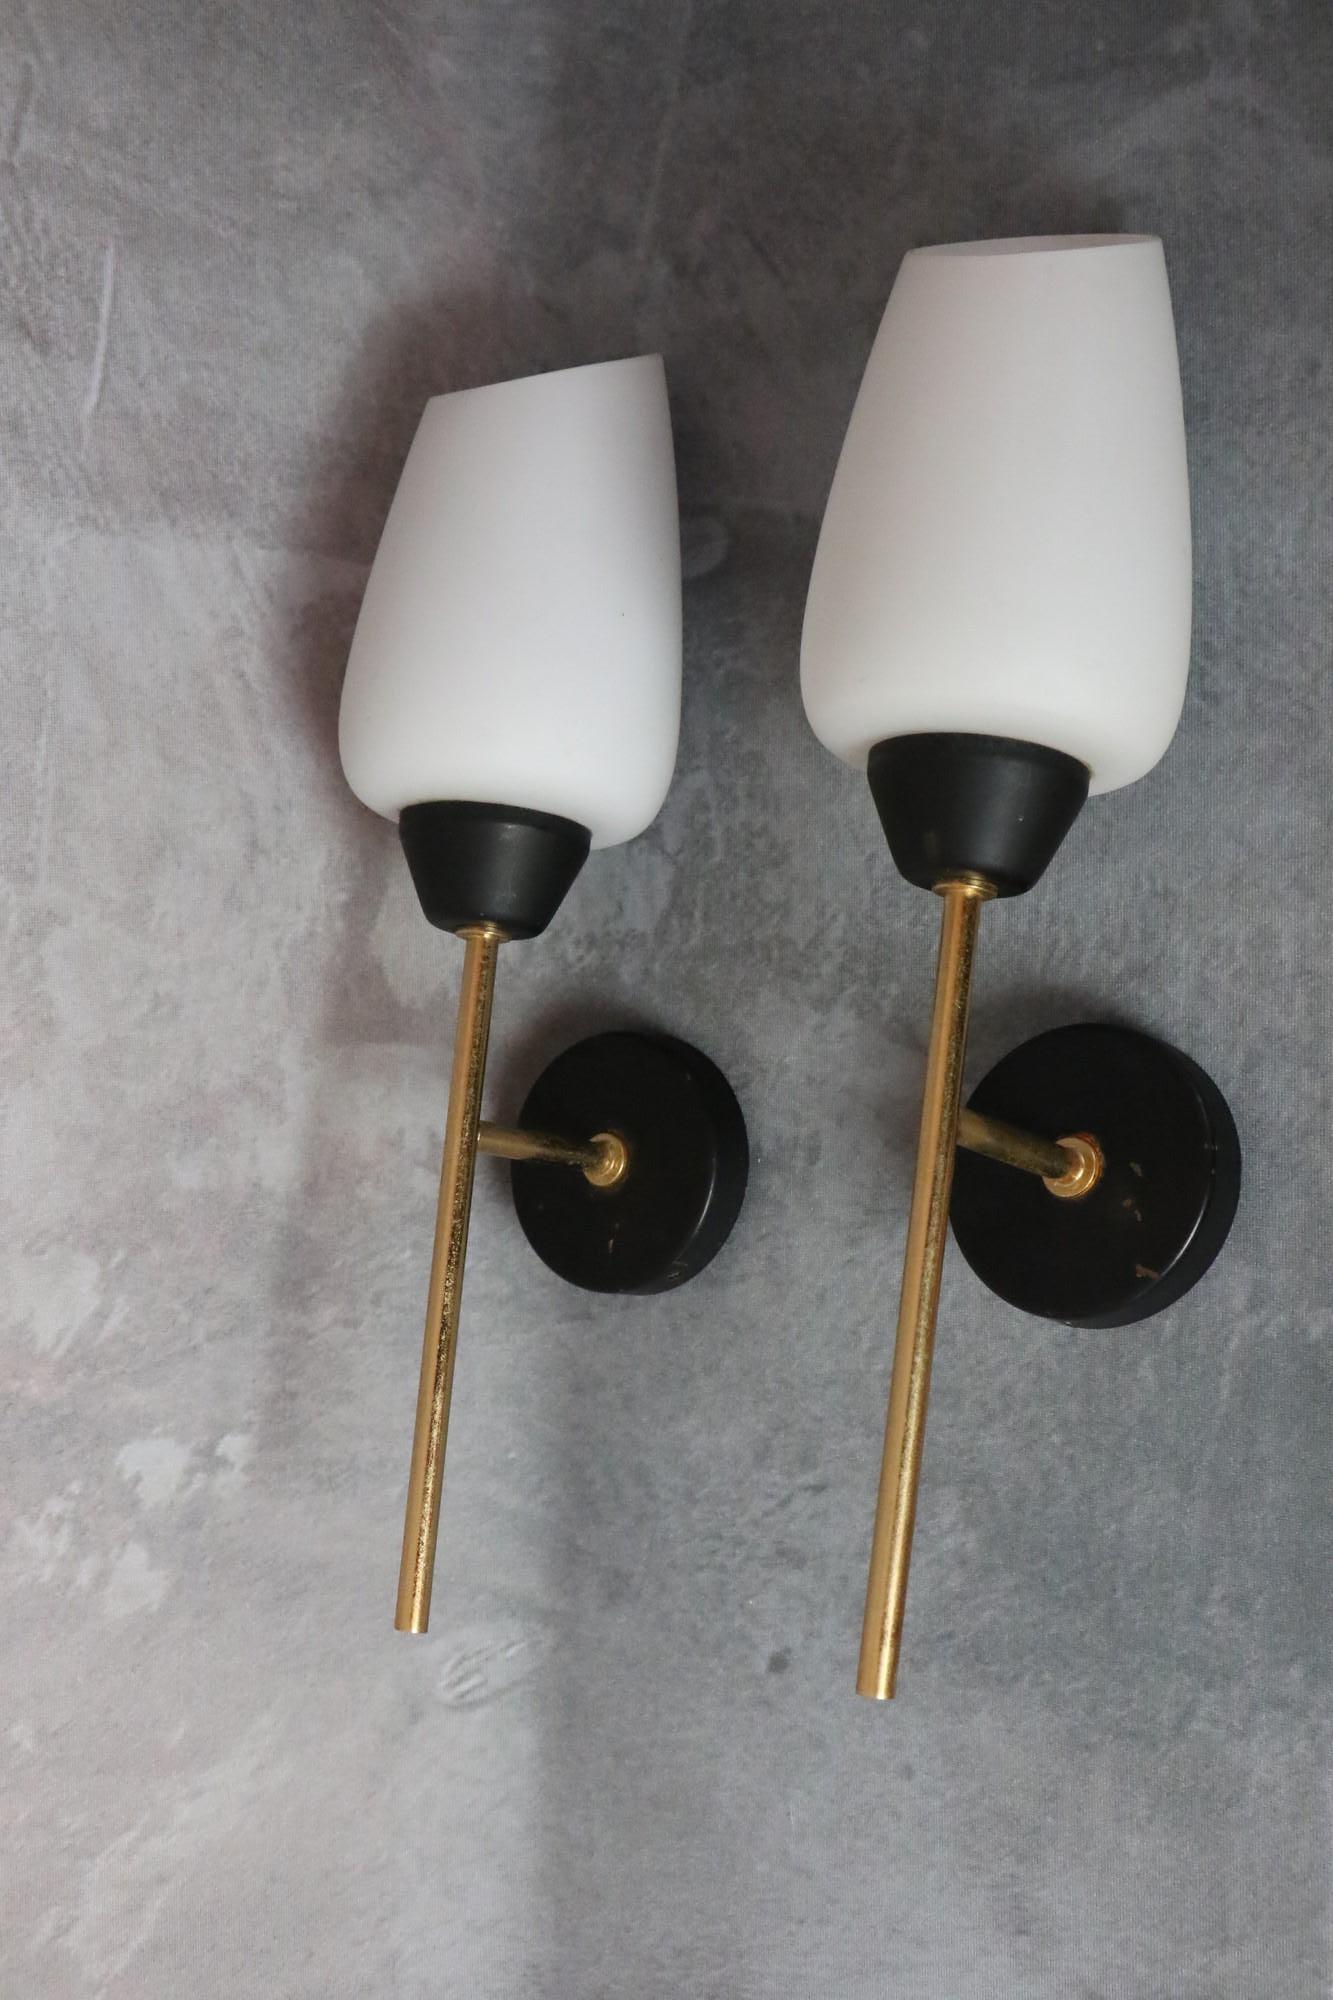 Maison Lunel - Pair of Mid-Century Modern Wall lights - 1950s France 3